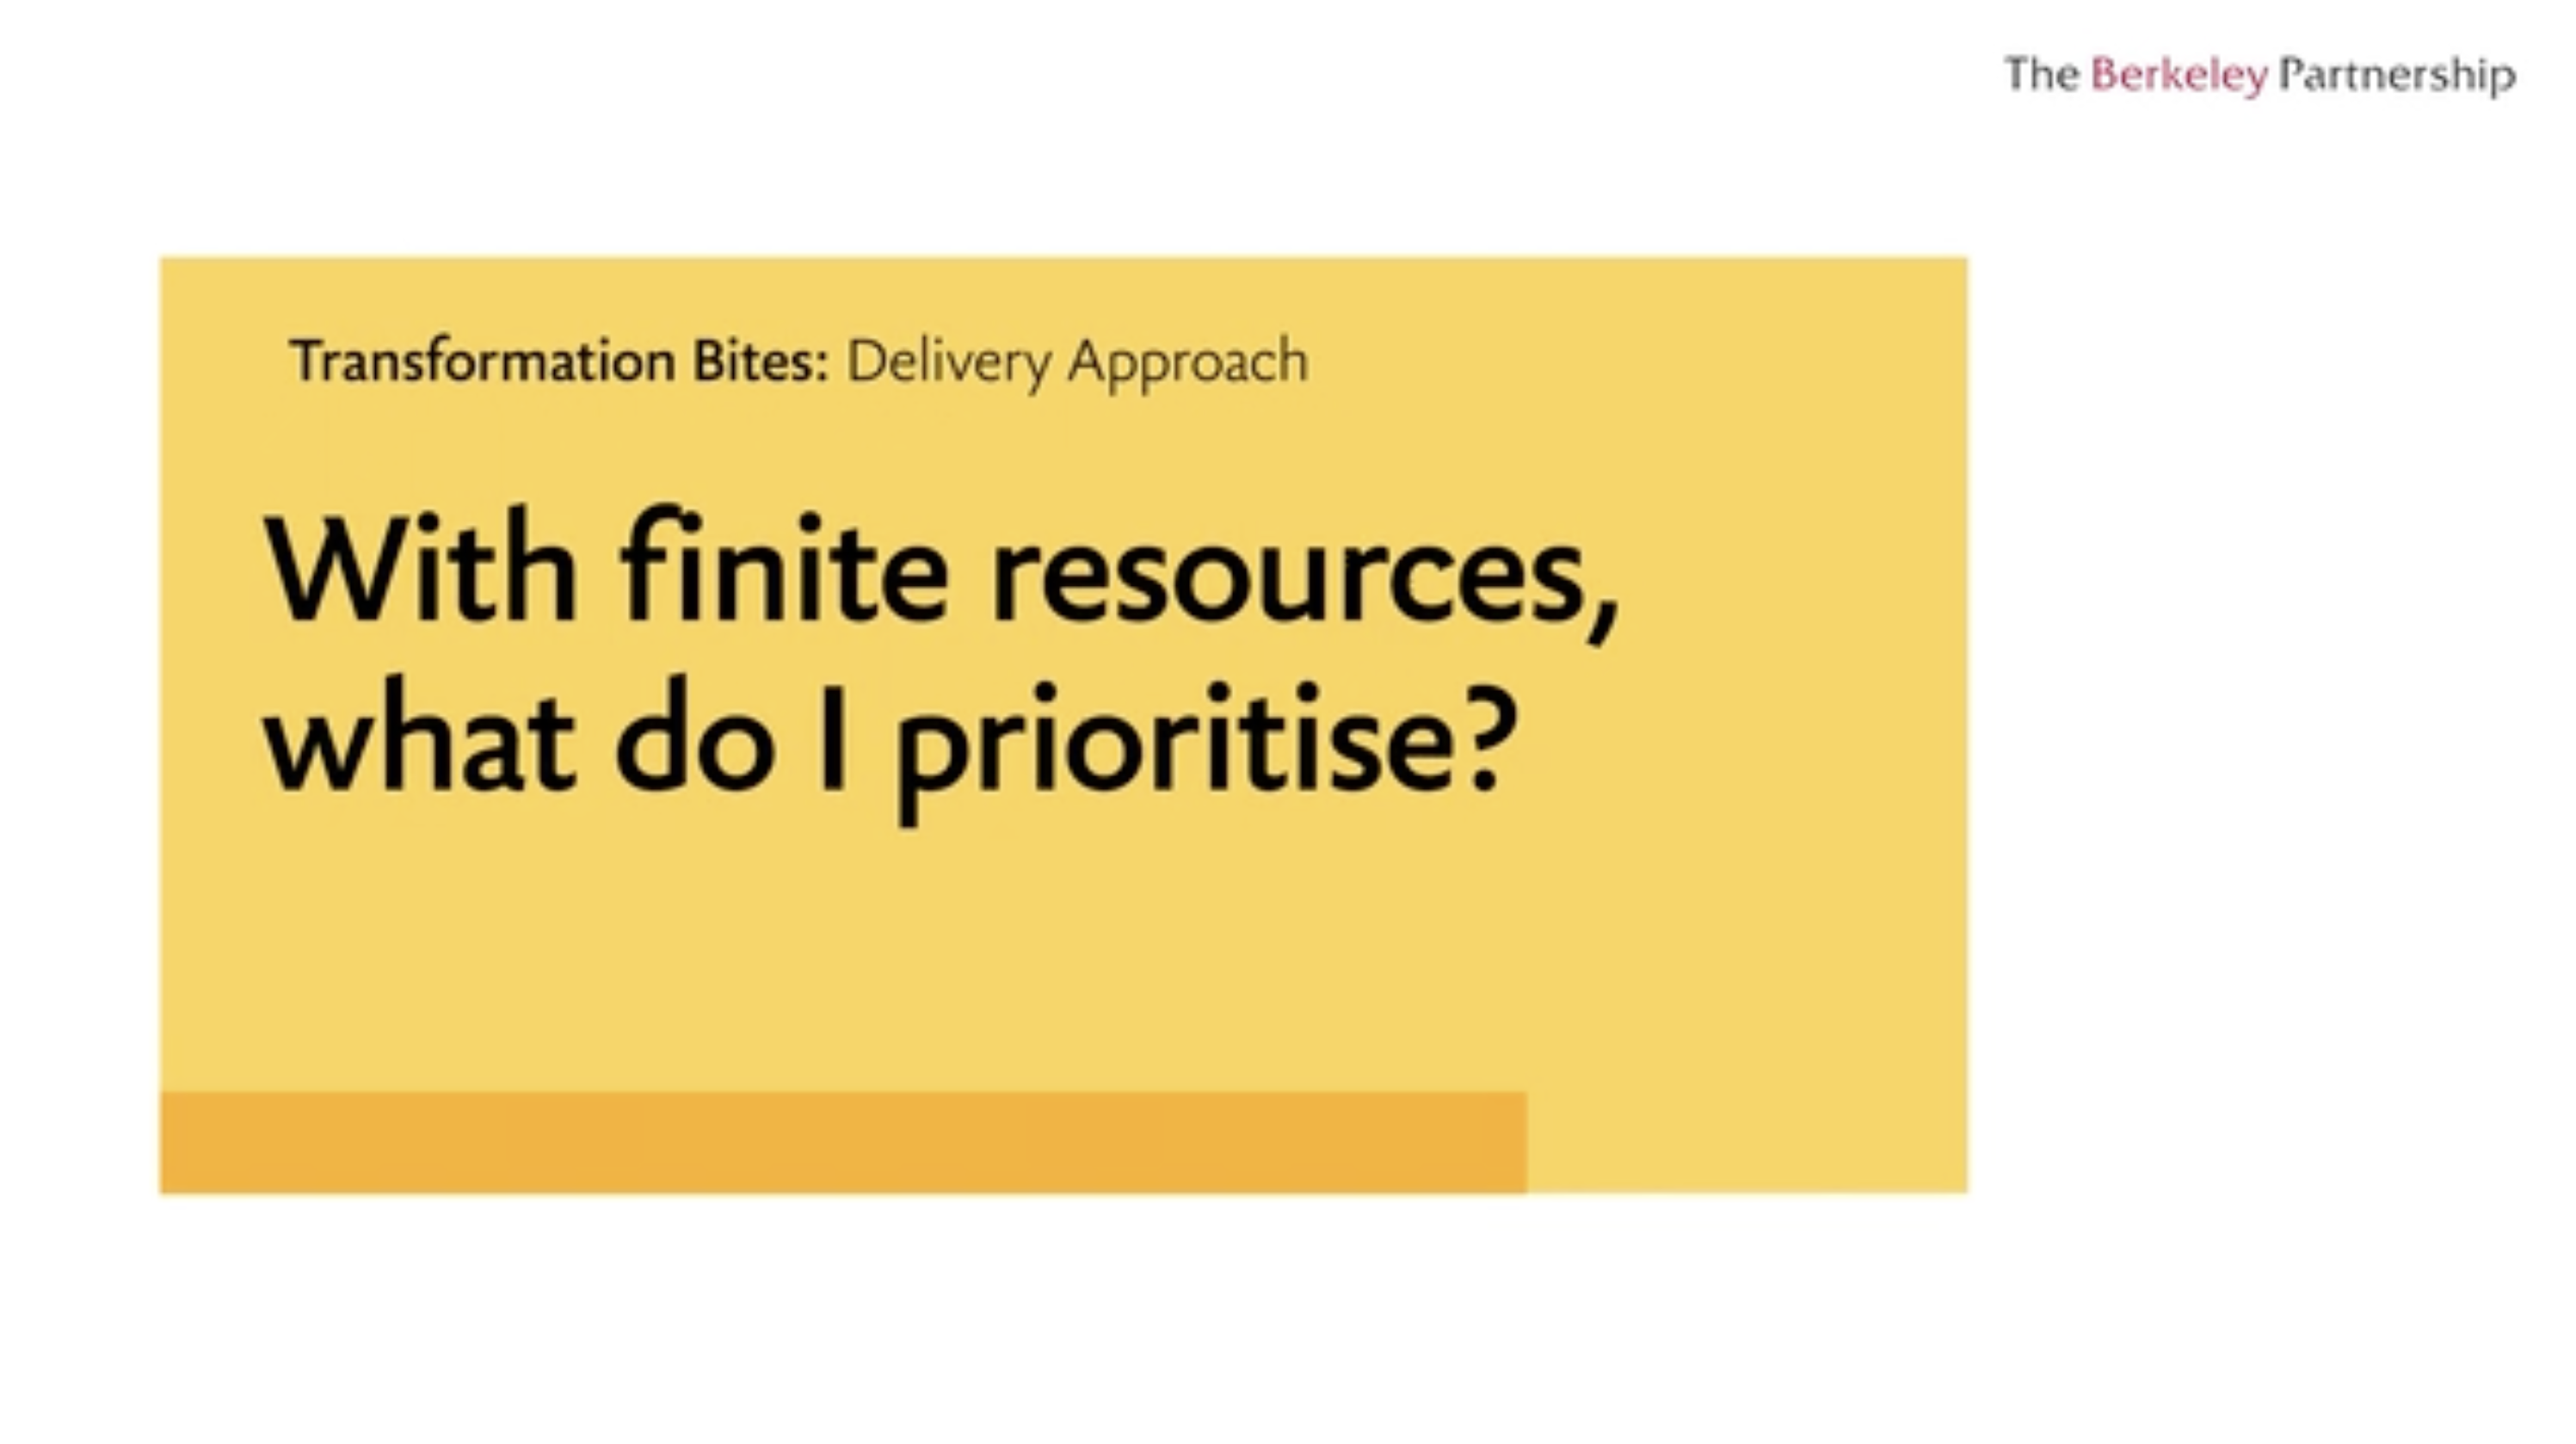 With finite resources, what do I prioritise?